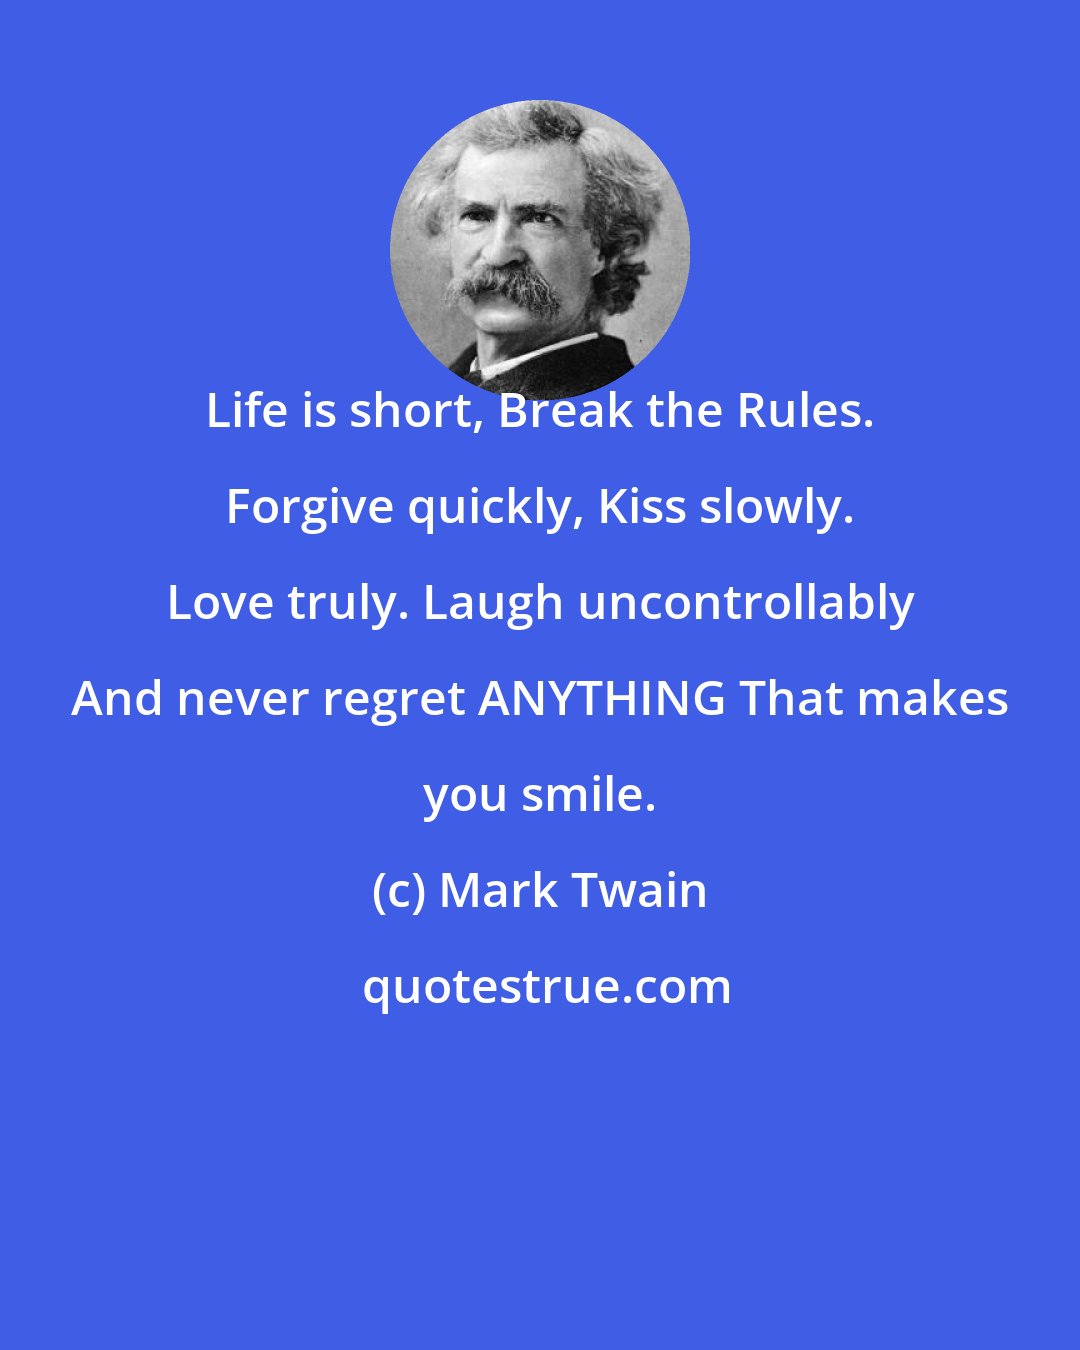 Mark Twain: Life is short, Break the Rules. Forgive quickly, Kiss slowly. Love truly. Laugh uncontrollably And never regret ANYTHING That makes you smile.